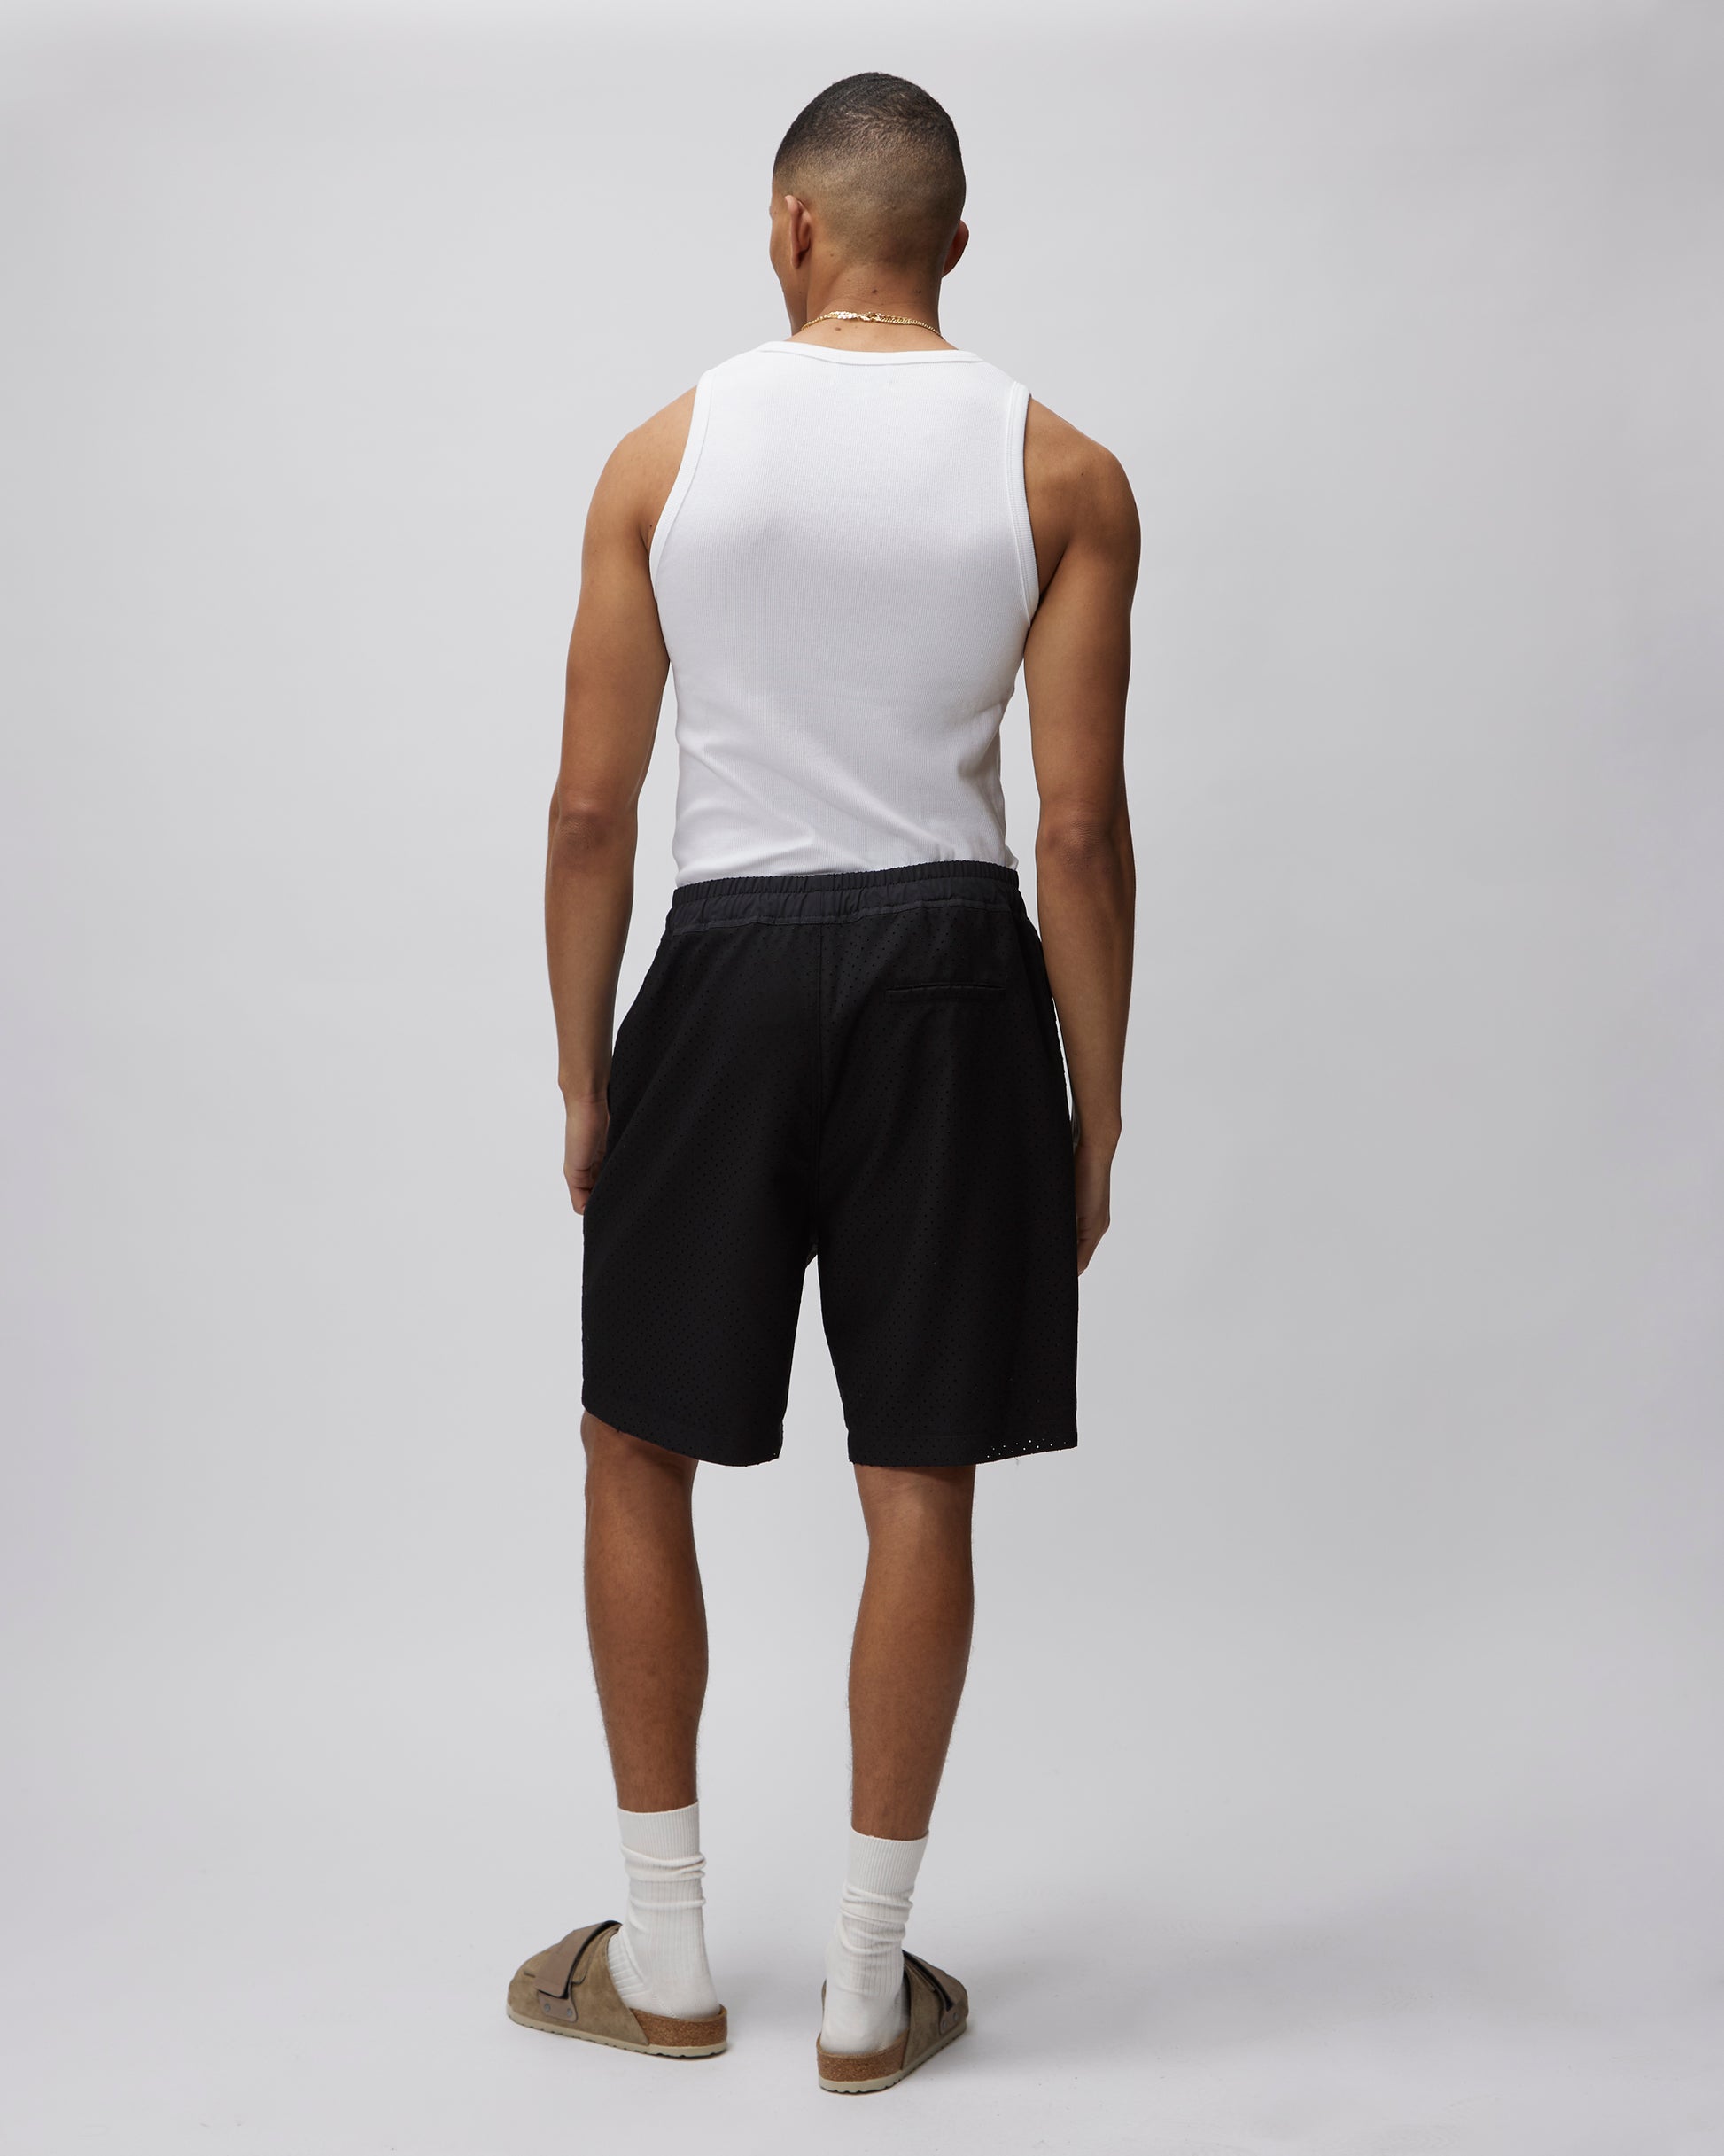 PERFORATED WOOL 86 SHORT - Due Diligence Apparel